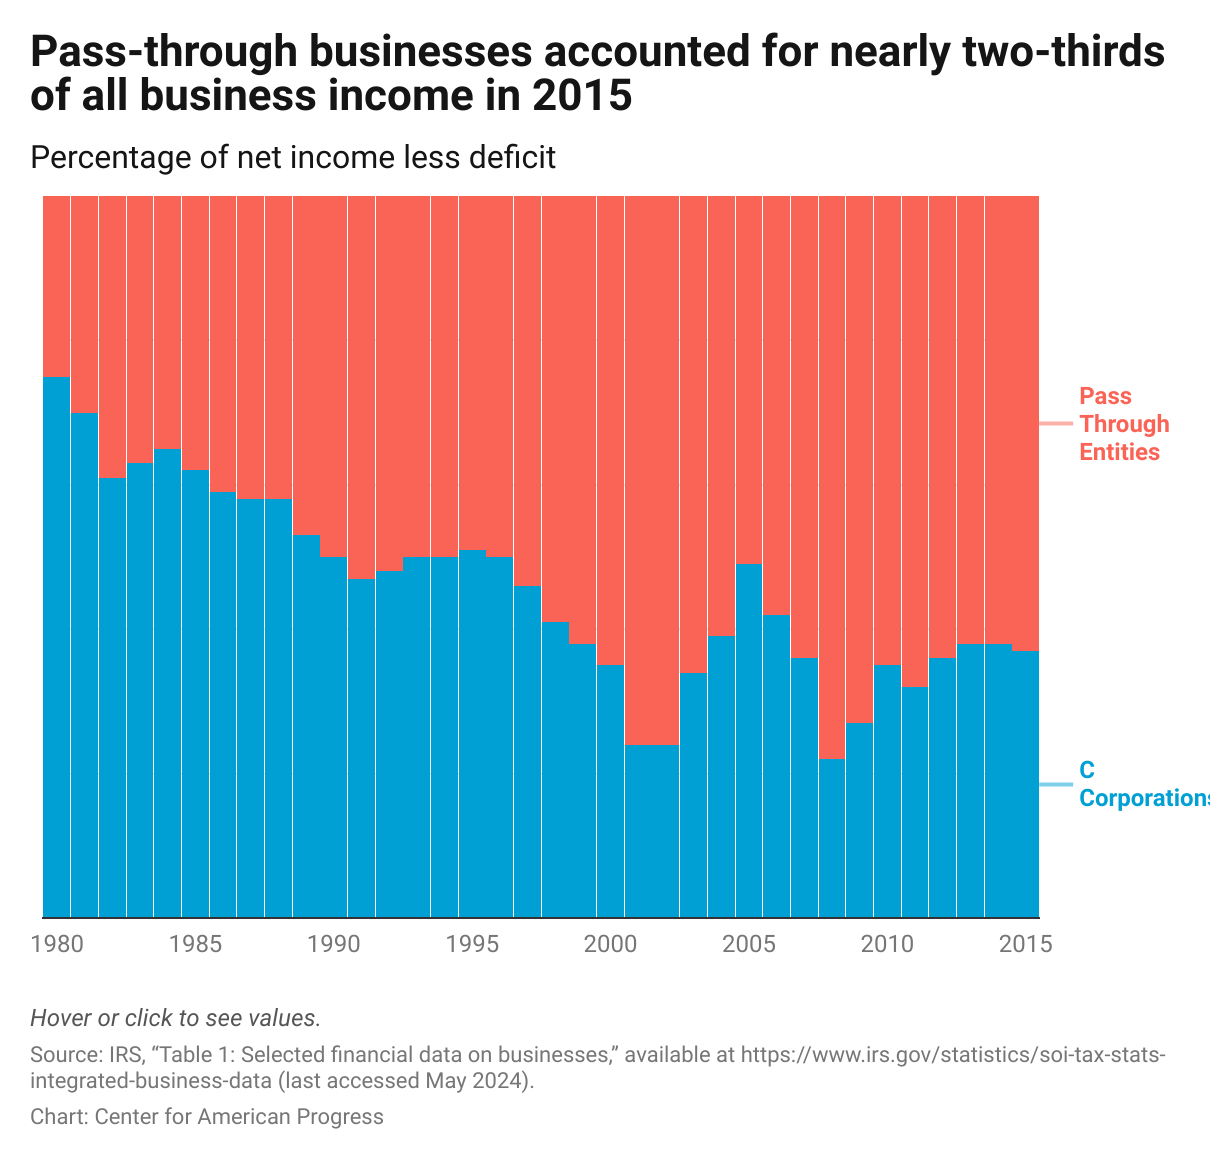 Graph showing that from 1980 to 2015, the share of total business net income rose for pass-through entities and declined for C corporations.